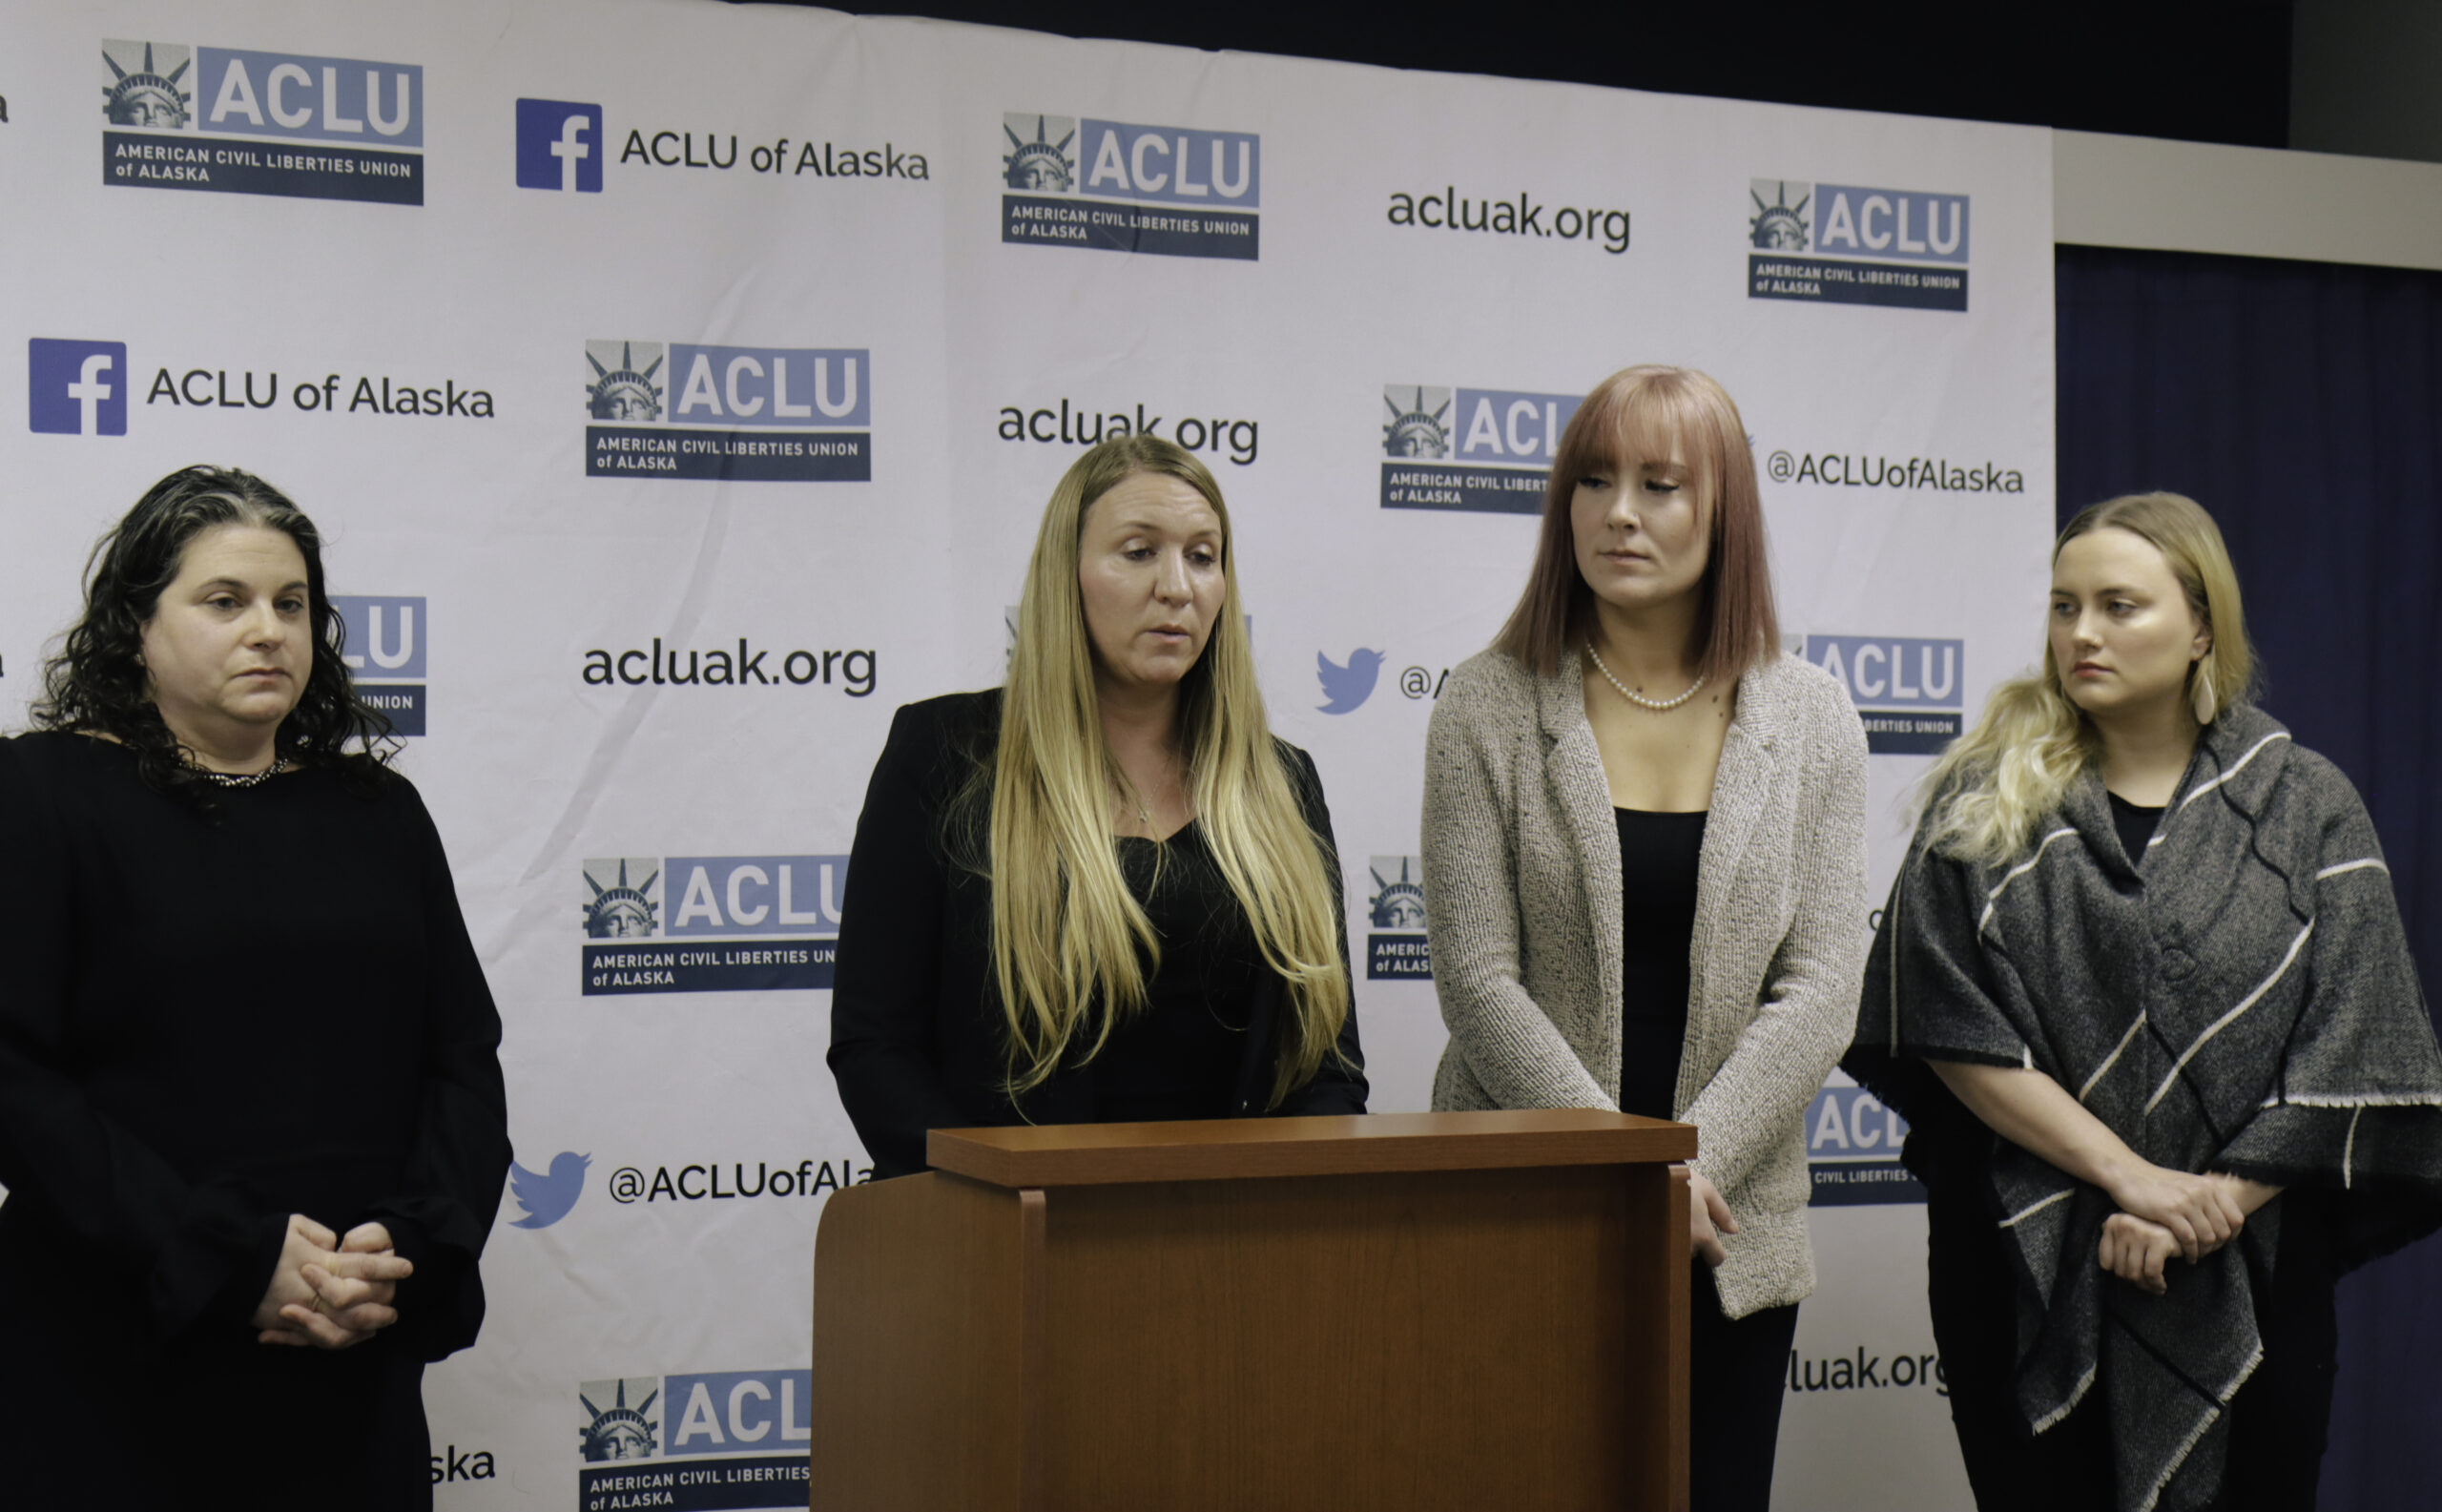 Four women stand behind a podium discussing ACLU of Alaska Prison Project. A woman with long blonde hair talks in front of press conference.